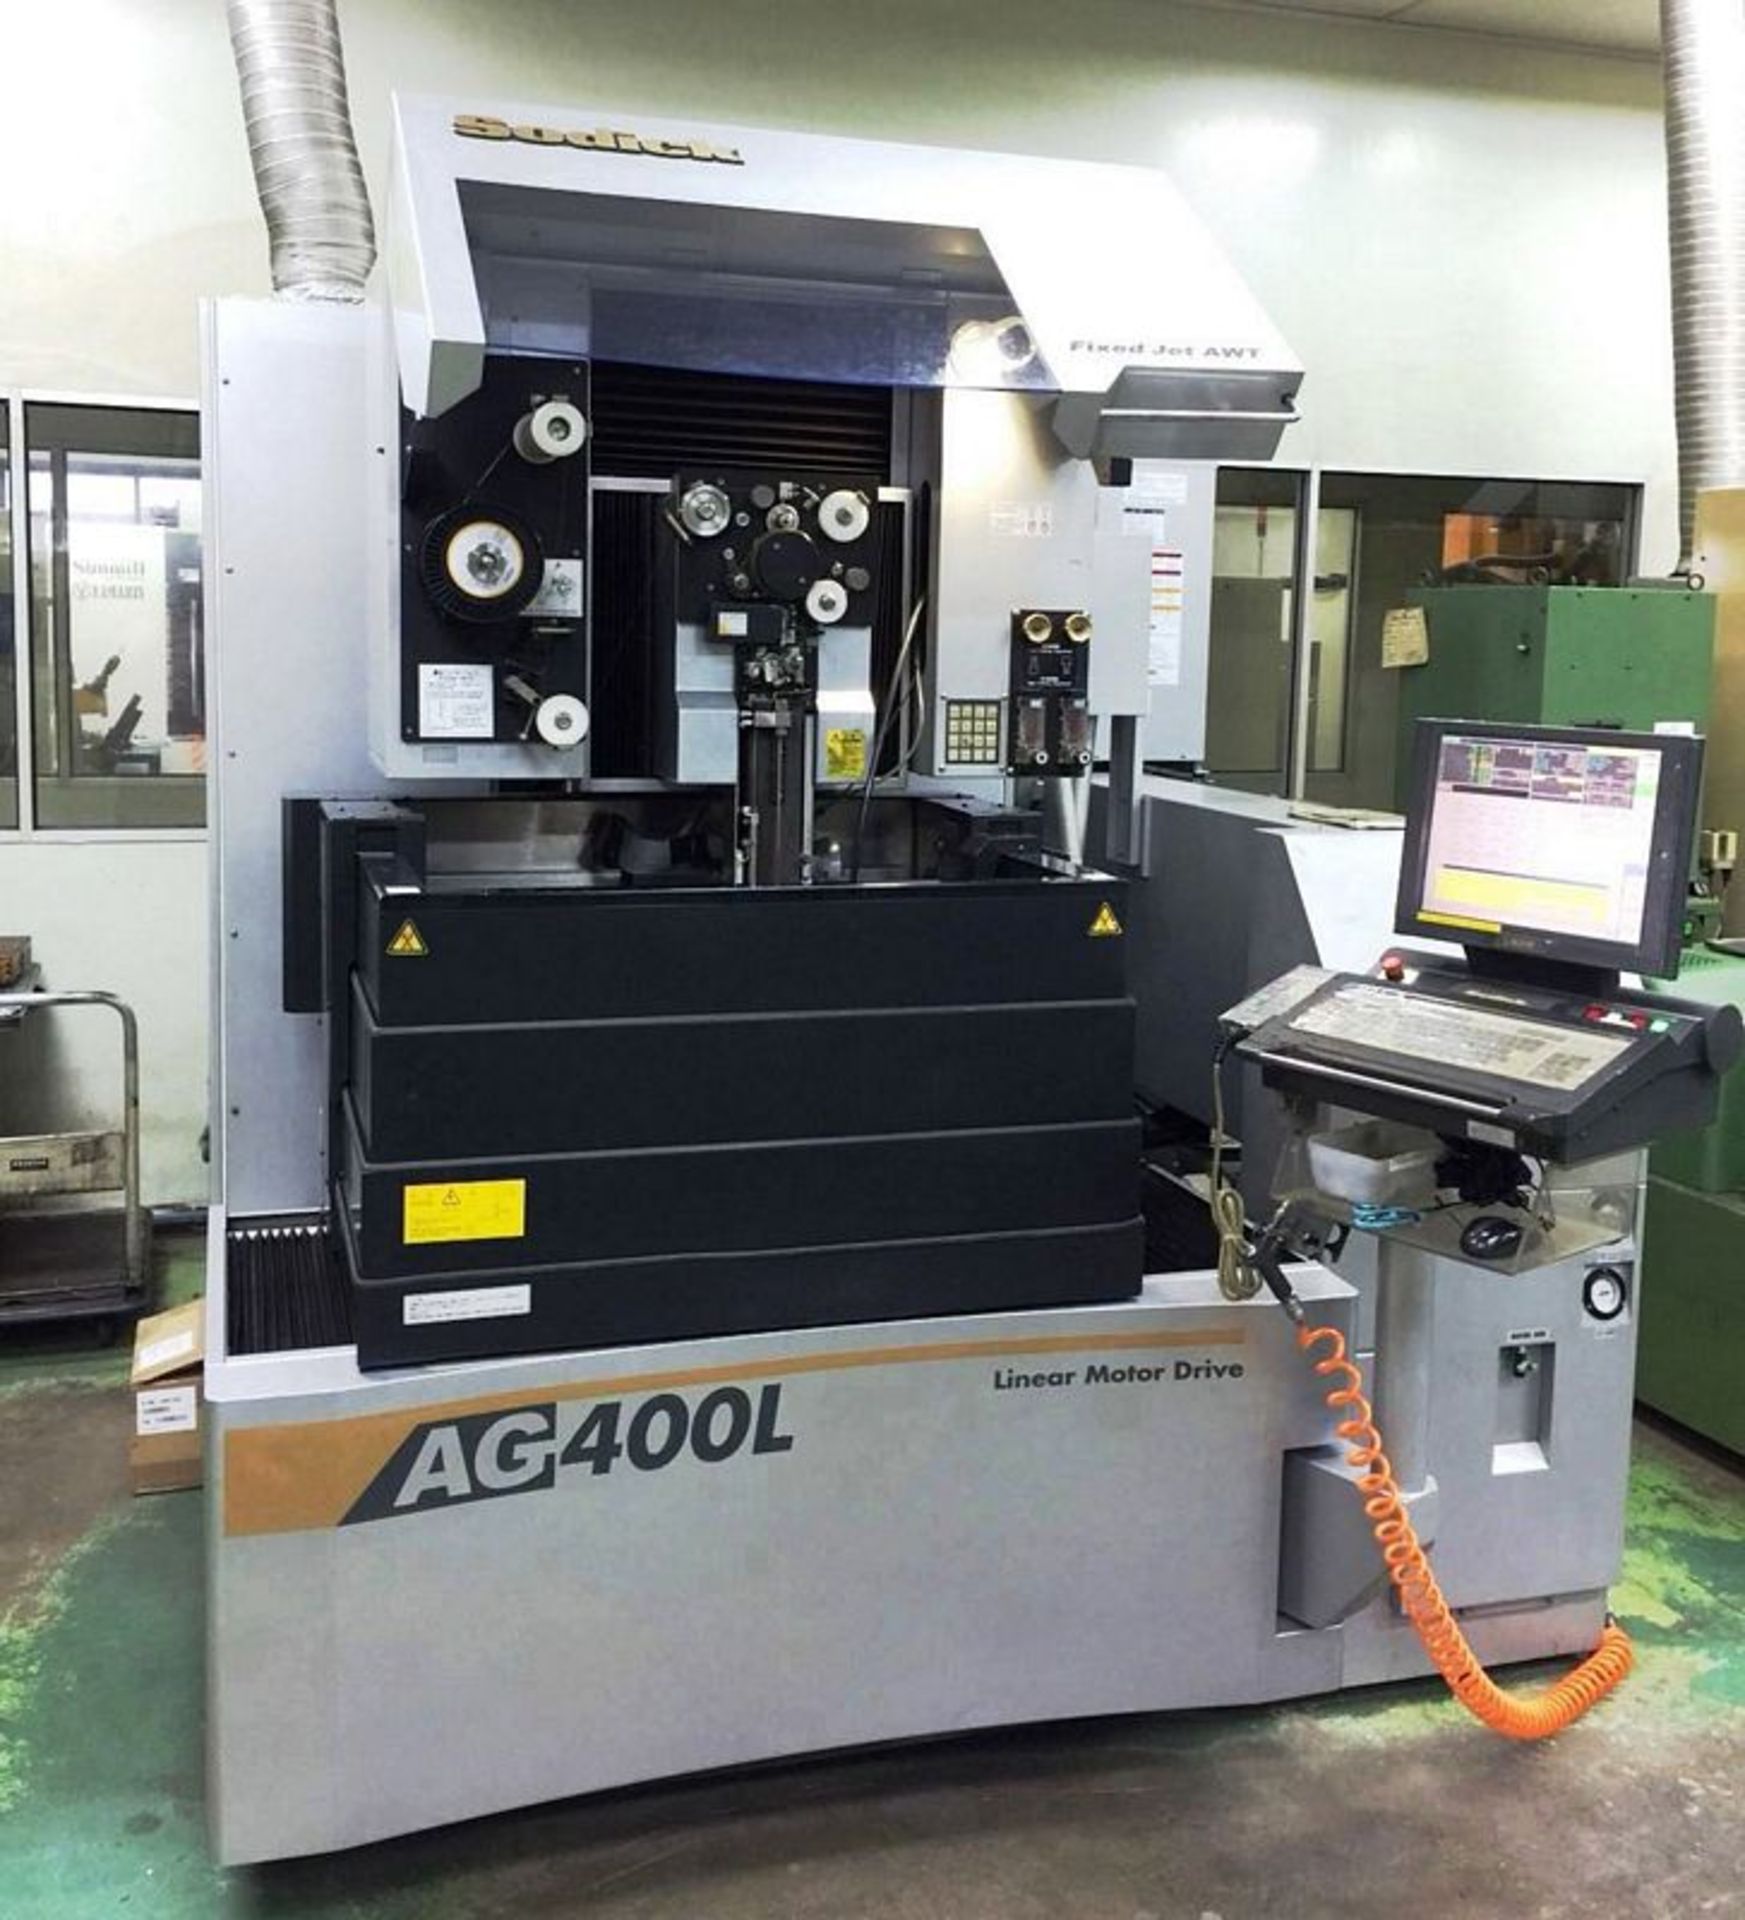 Sodick AG400L CNC 5-Axis Wire Cut EDM, S/N 1255, New 2013 Specifications, X Axis Travel 15.75", Y